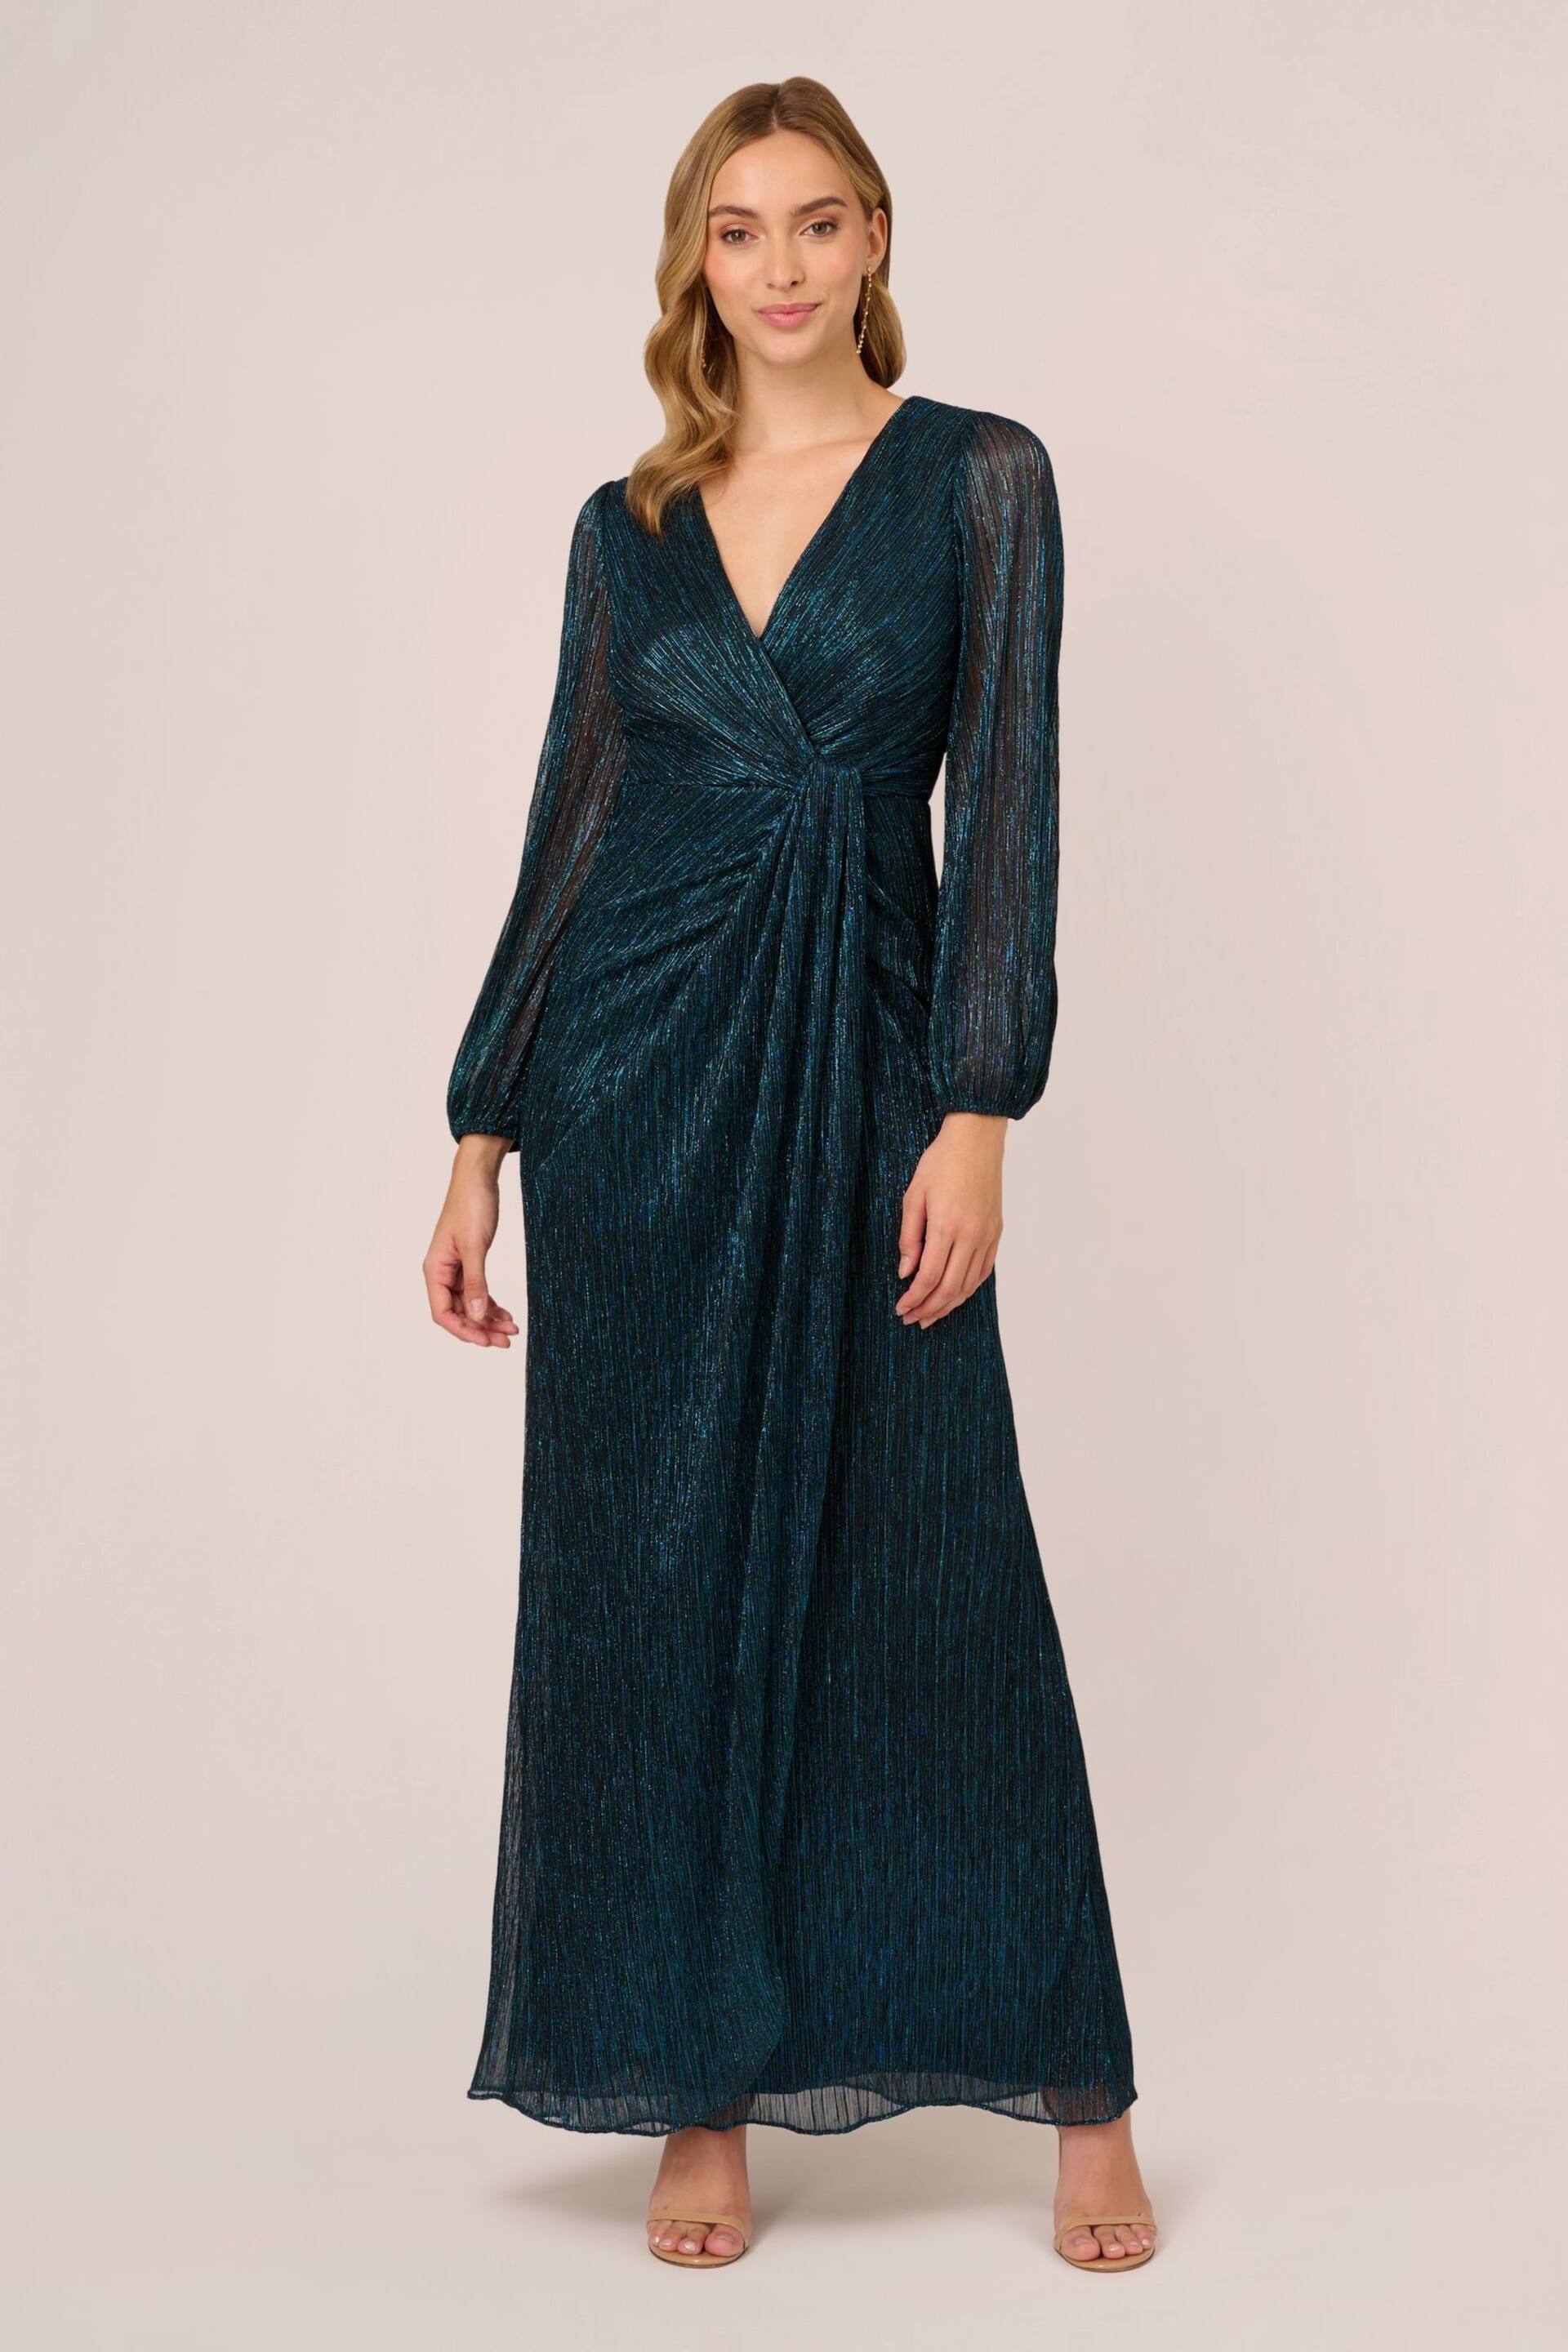 Adrianna Papell Blue Metallic Mesh Draped Gown - Image 1 of 7